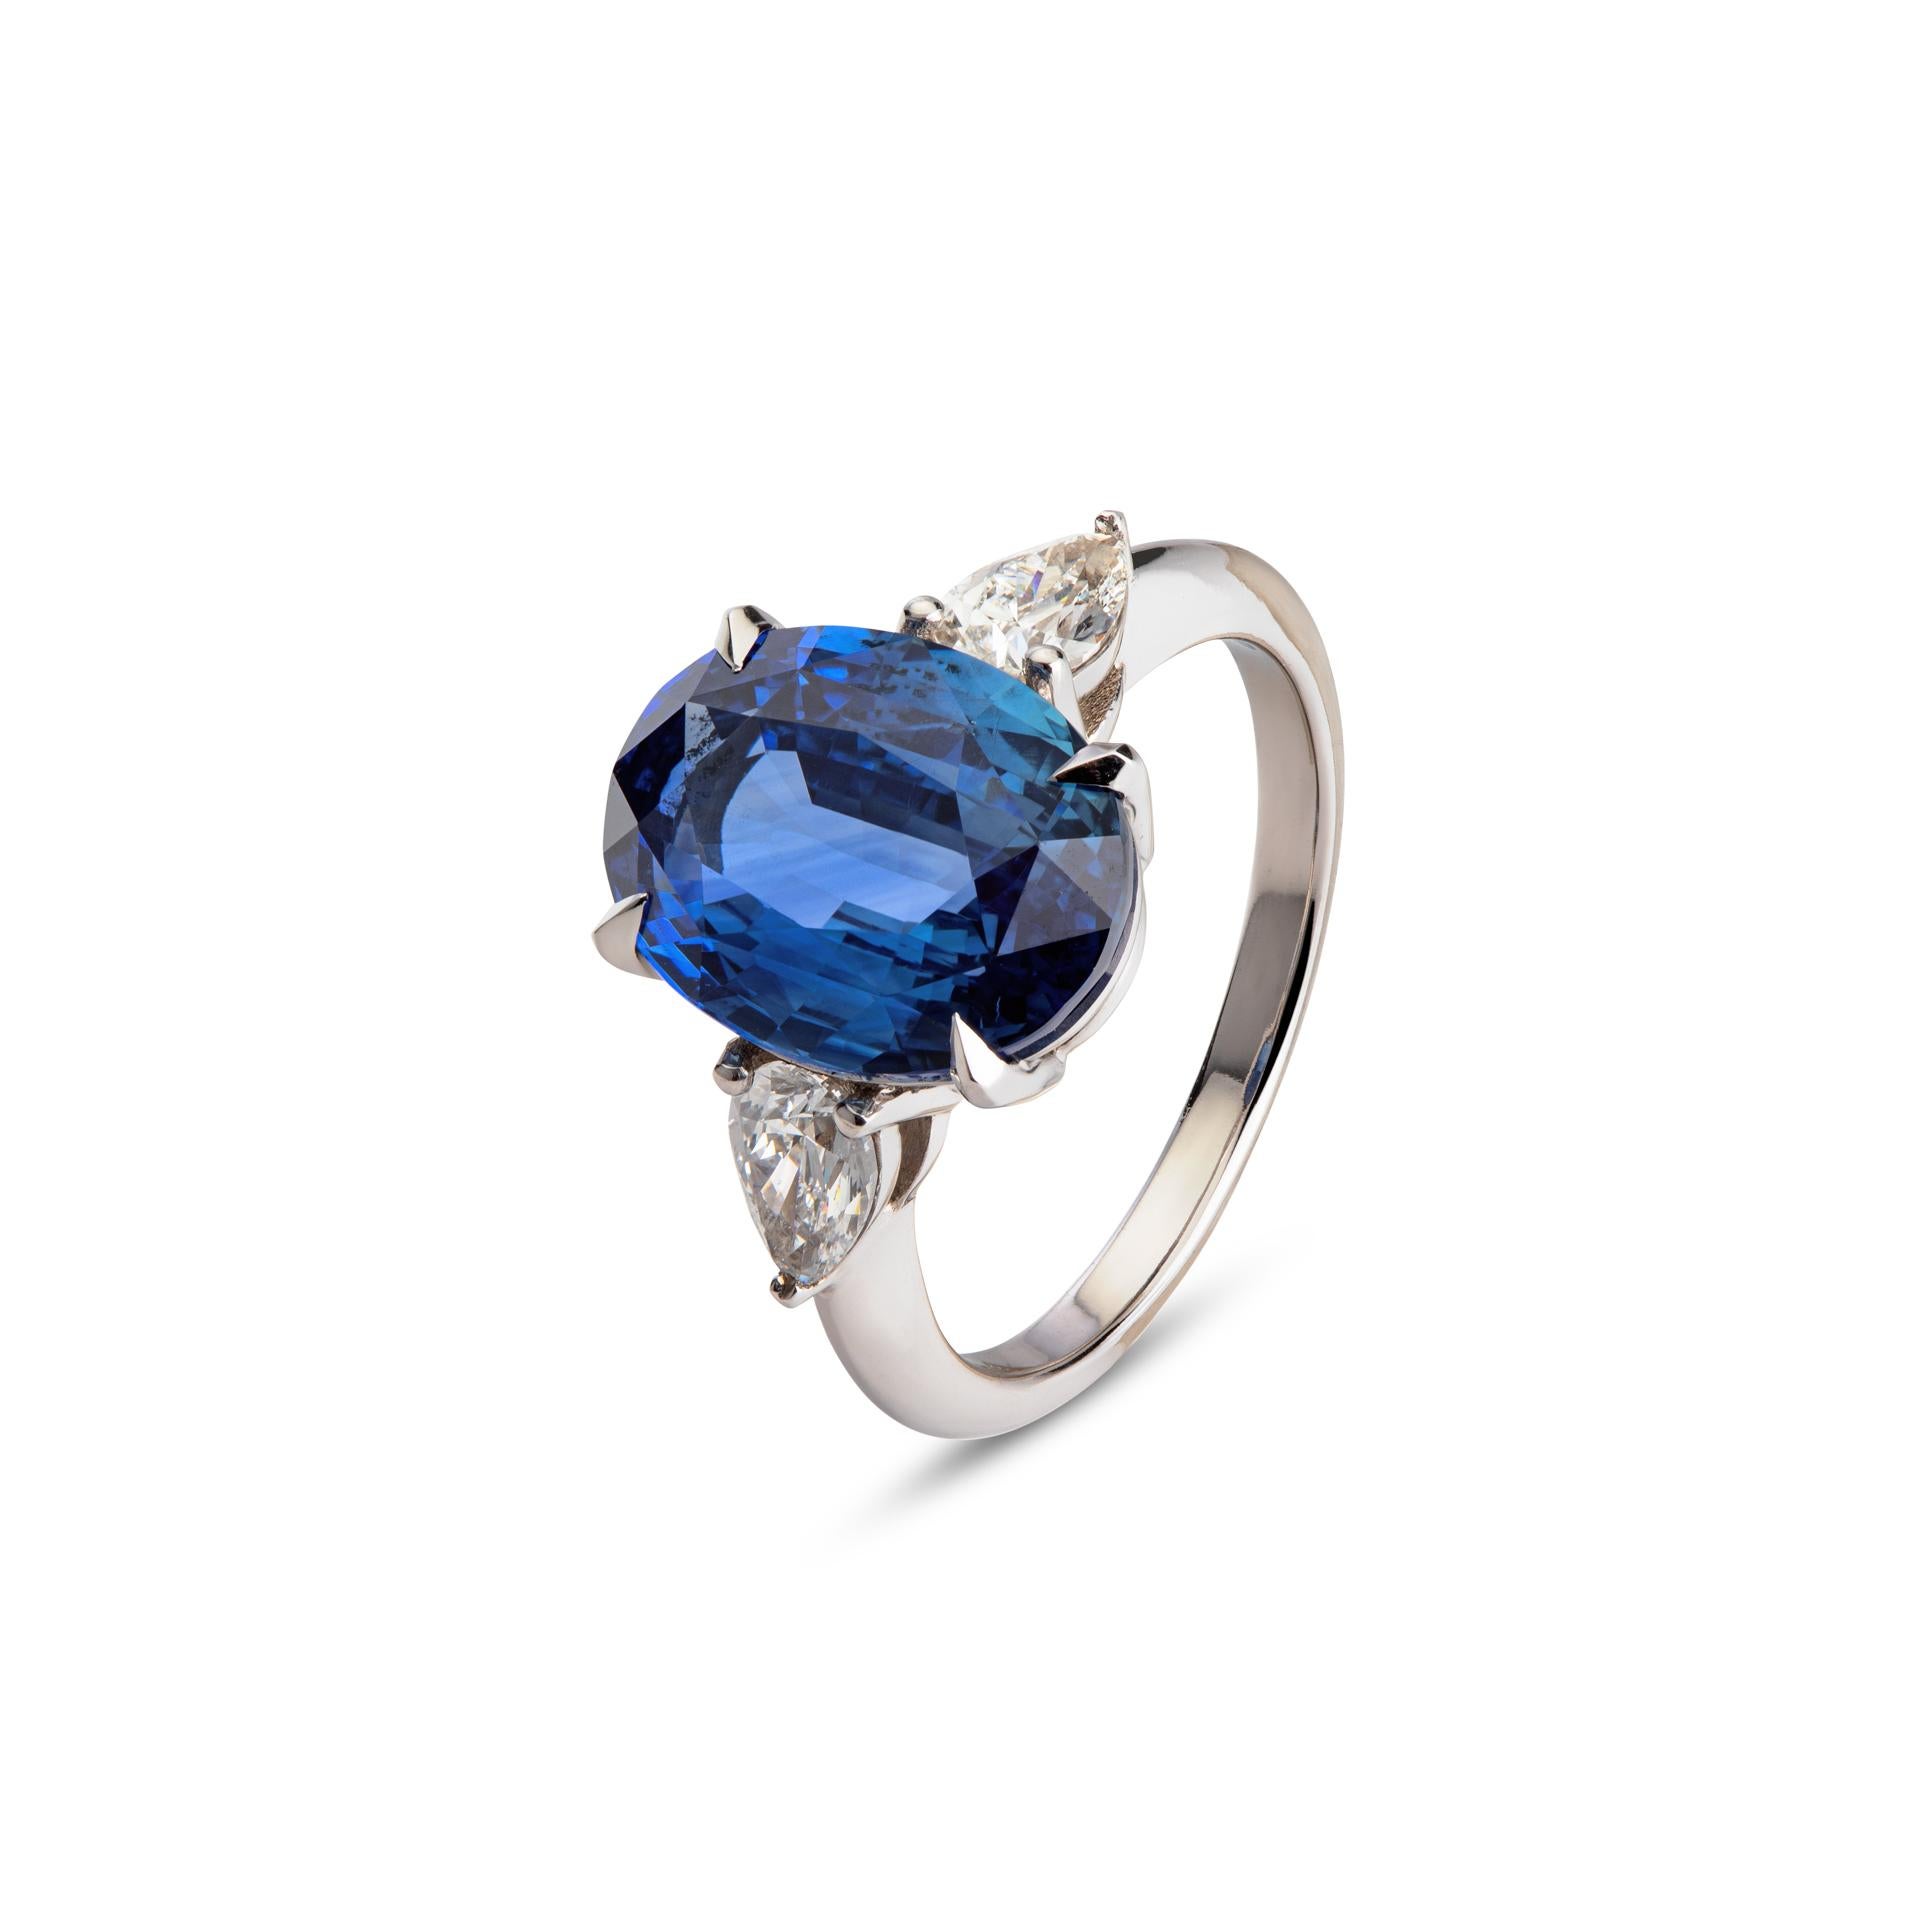 Breathtaking 6.10ct Ceylon blue sapphire from Sri Lanka, showcases a captivating deep blue hue that radiates with unparalleled brilliance. The sapphire is skillfully cut in an oval step cut, maximizing its brilliance and creating a mesmerizing play